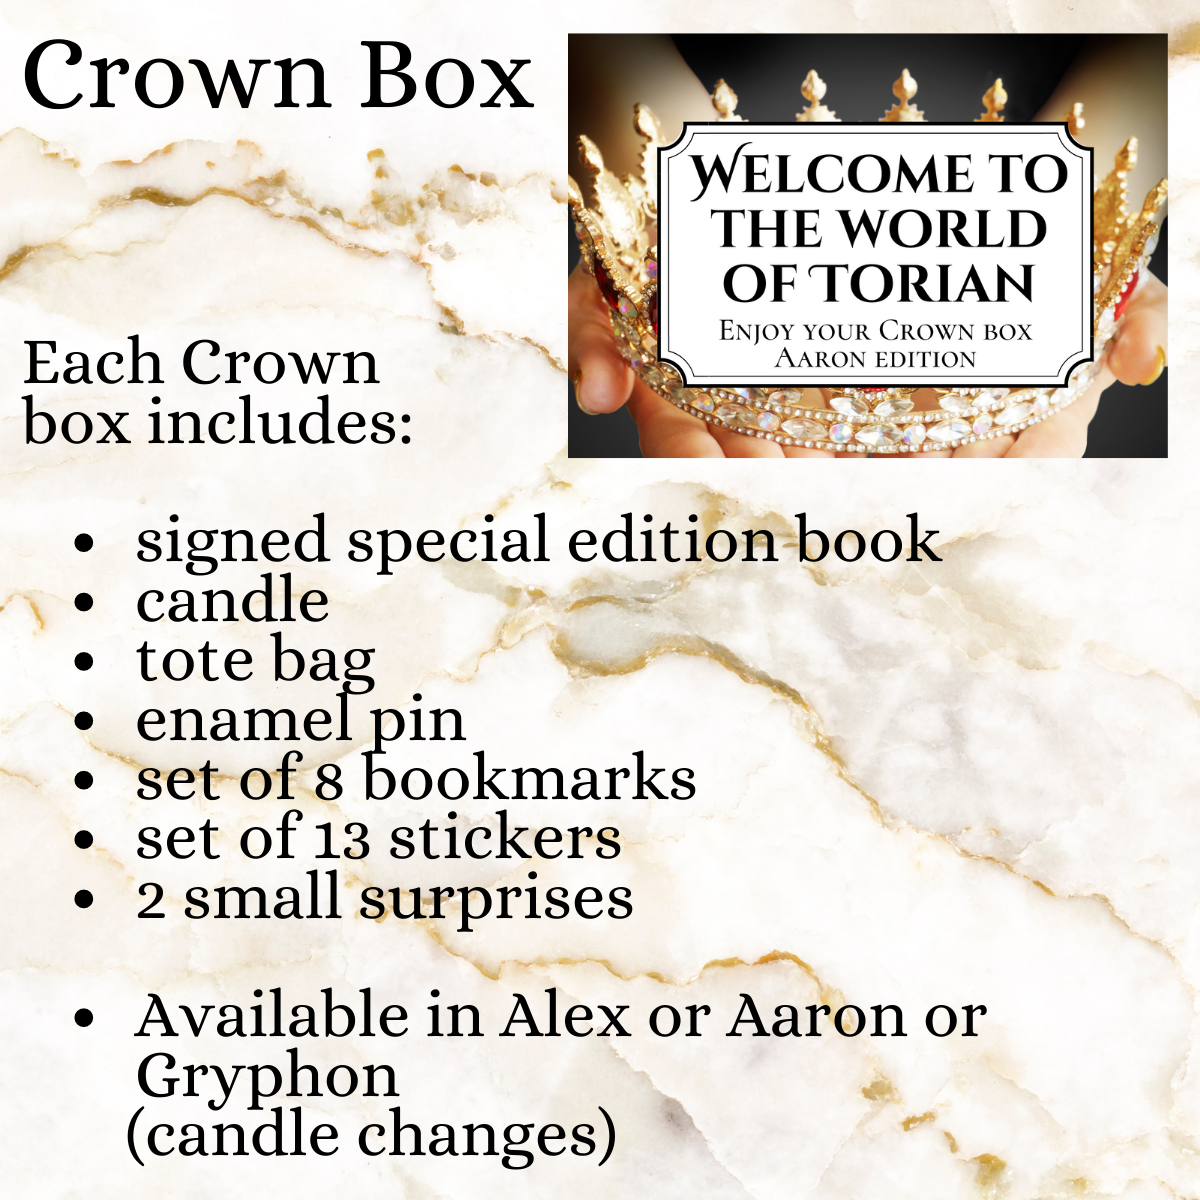 Image of box logo with list of box contents: signed special edition book, candle, tote bag, enamel pin, set of 8 bookmarks, set of 13 stickers,2 small surprises - available in Alex, Aaron or Gryphon